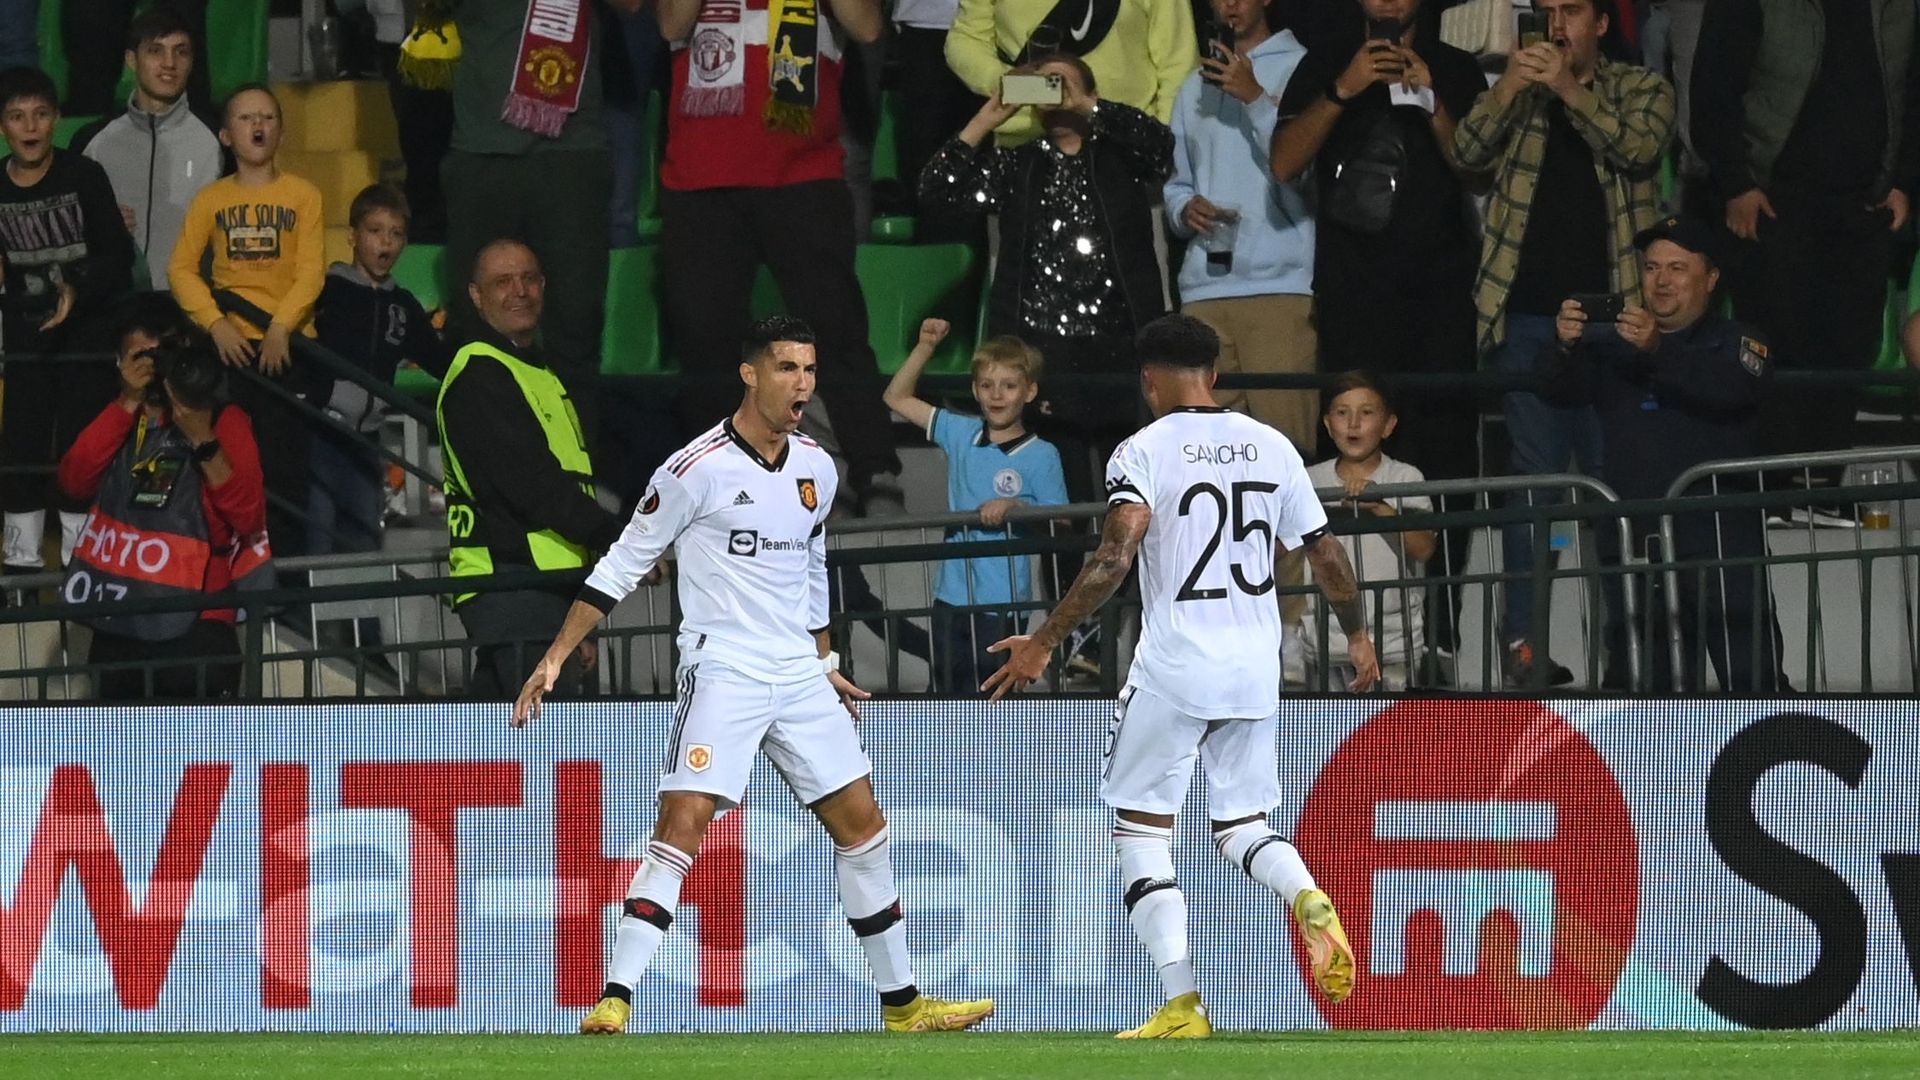 Cristiano Ronaldo opened his goal counter this season to the delight of the fans… Sharif Tiraspol